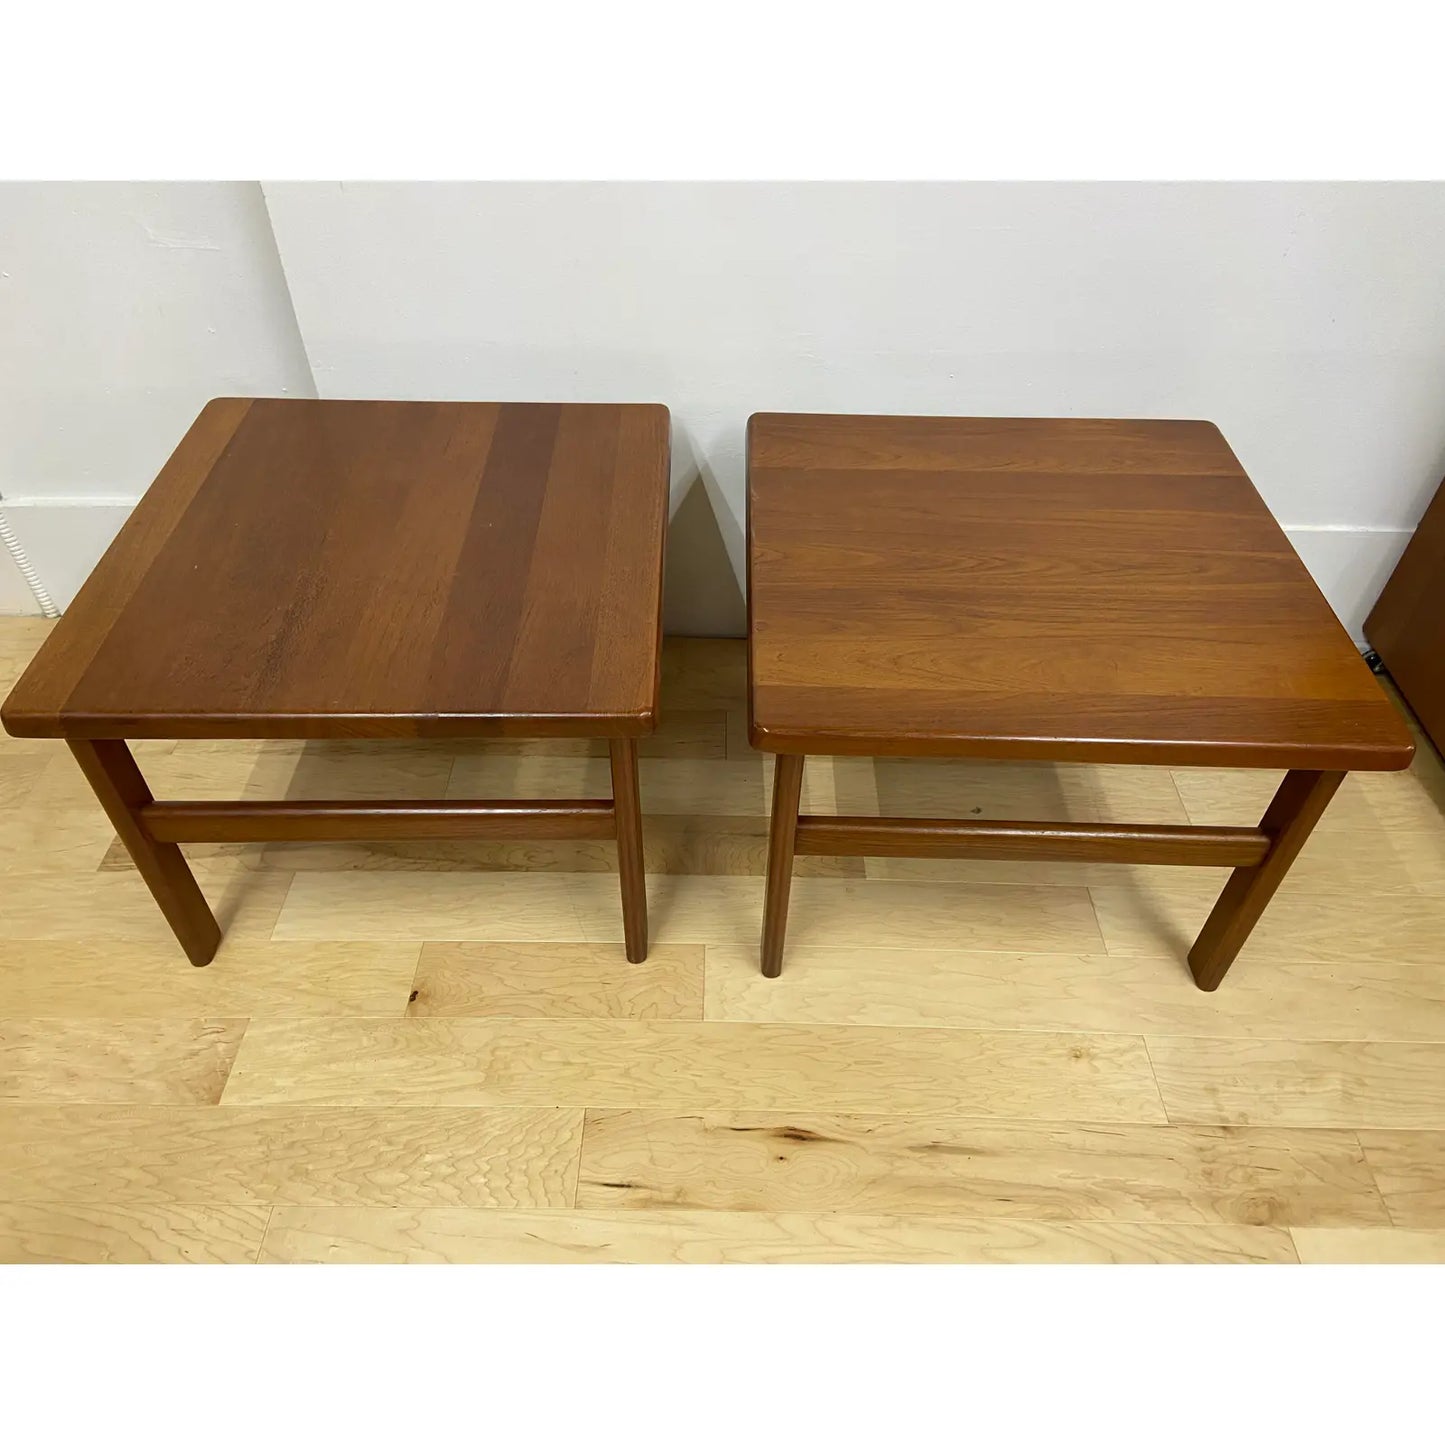 NEILS BACH SOLID TEAK END TABLES - PAIR